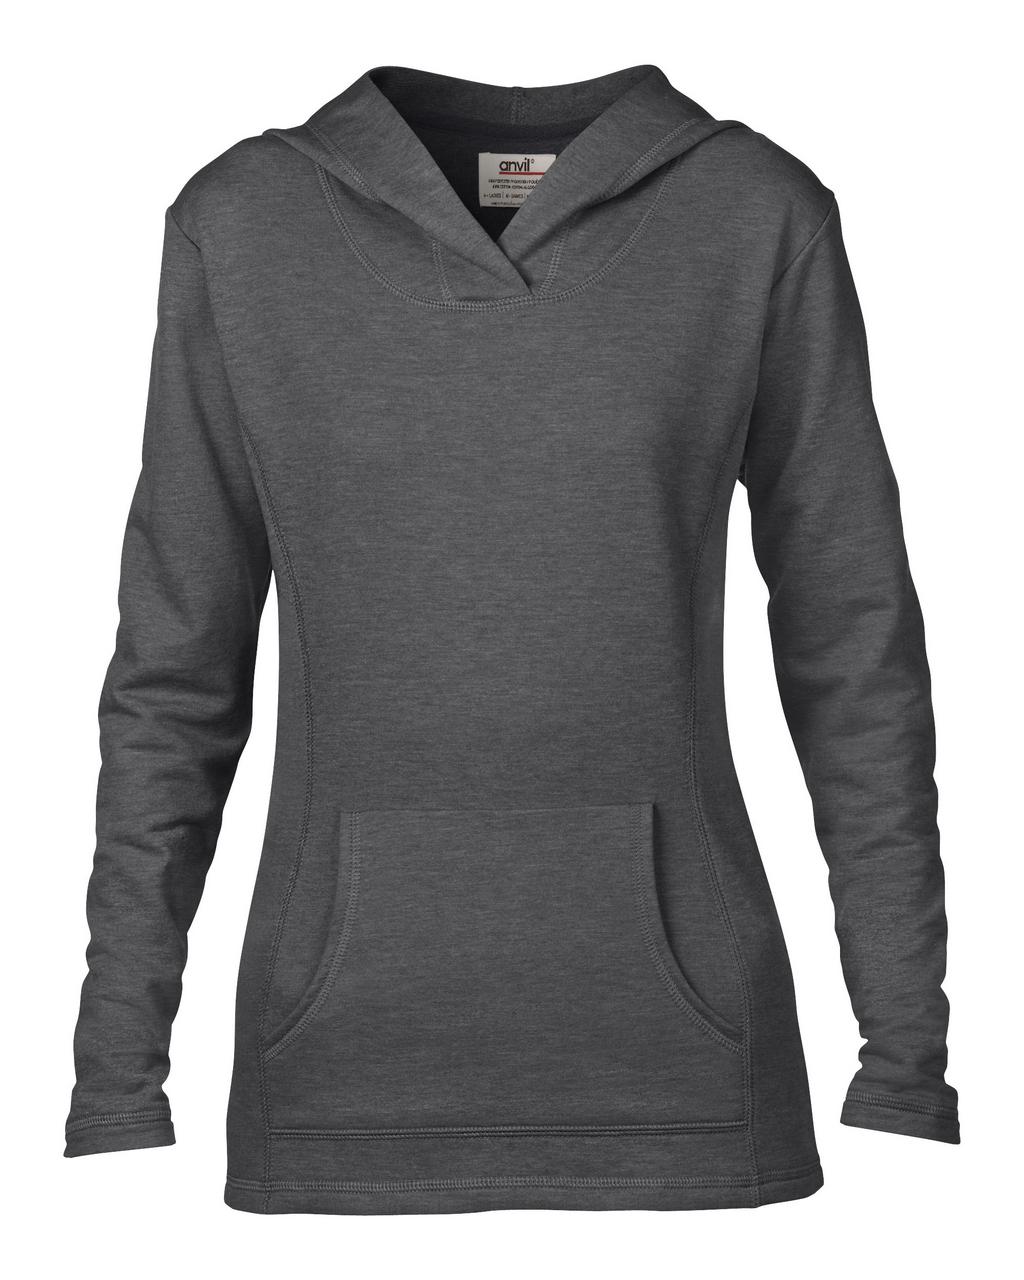 WOMEN’S HOODED FRENCH TERRY